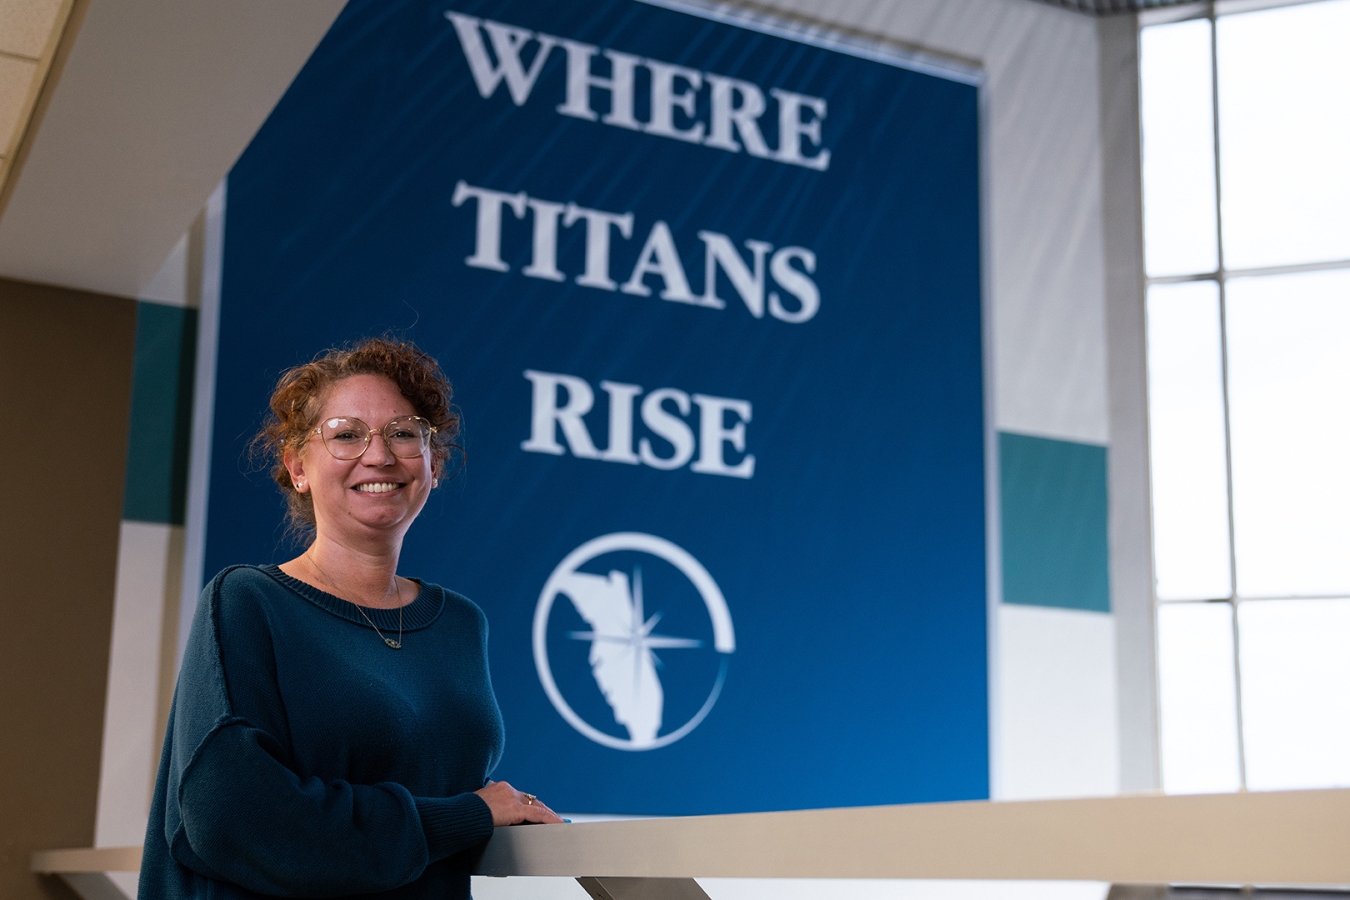 Woman with red hair smiling in front of a blue banner that says, "Where Titans Rise".